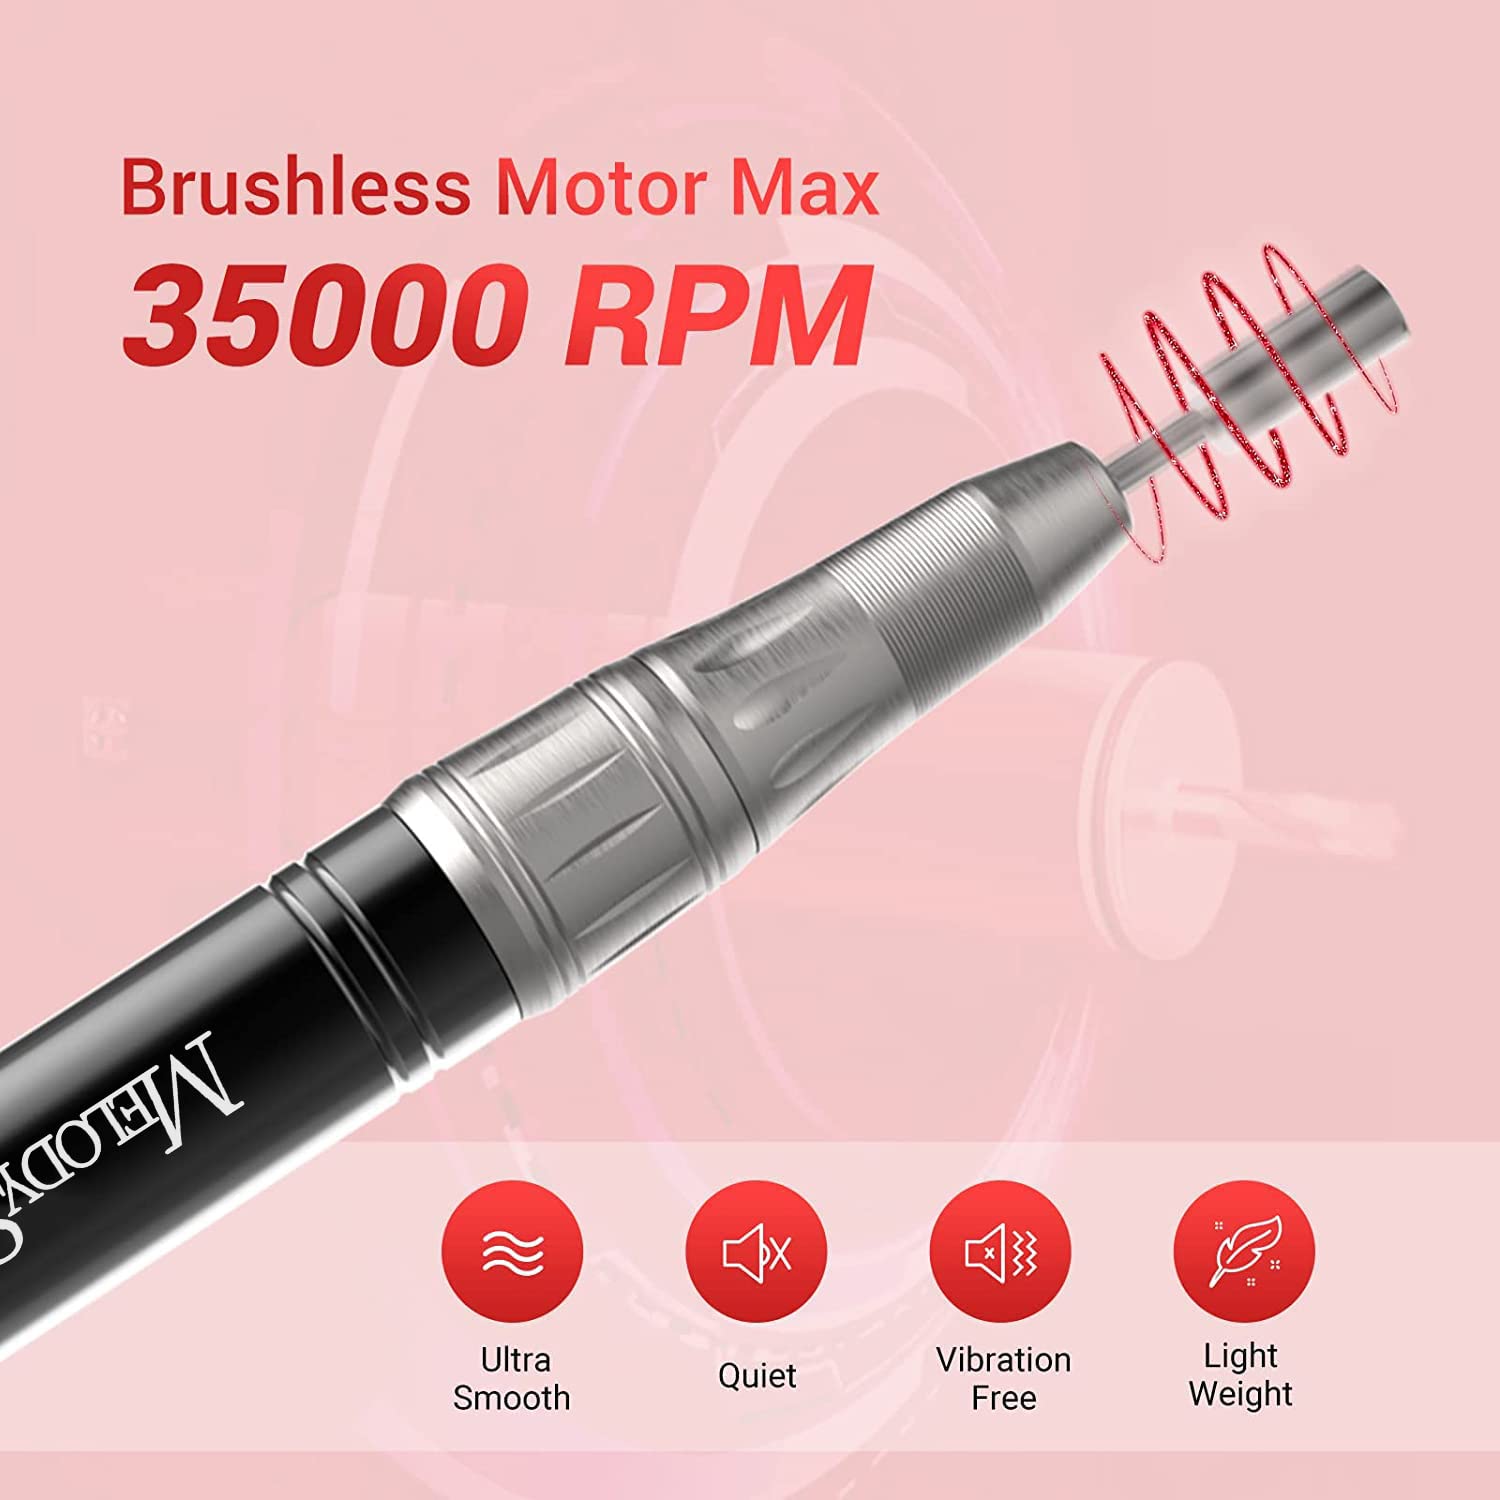 MR3-Kanon Rechargeable Nail Drill 35,000 RPM-Customized